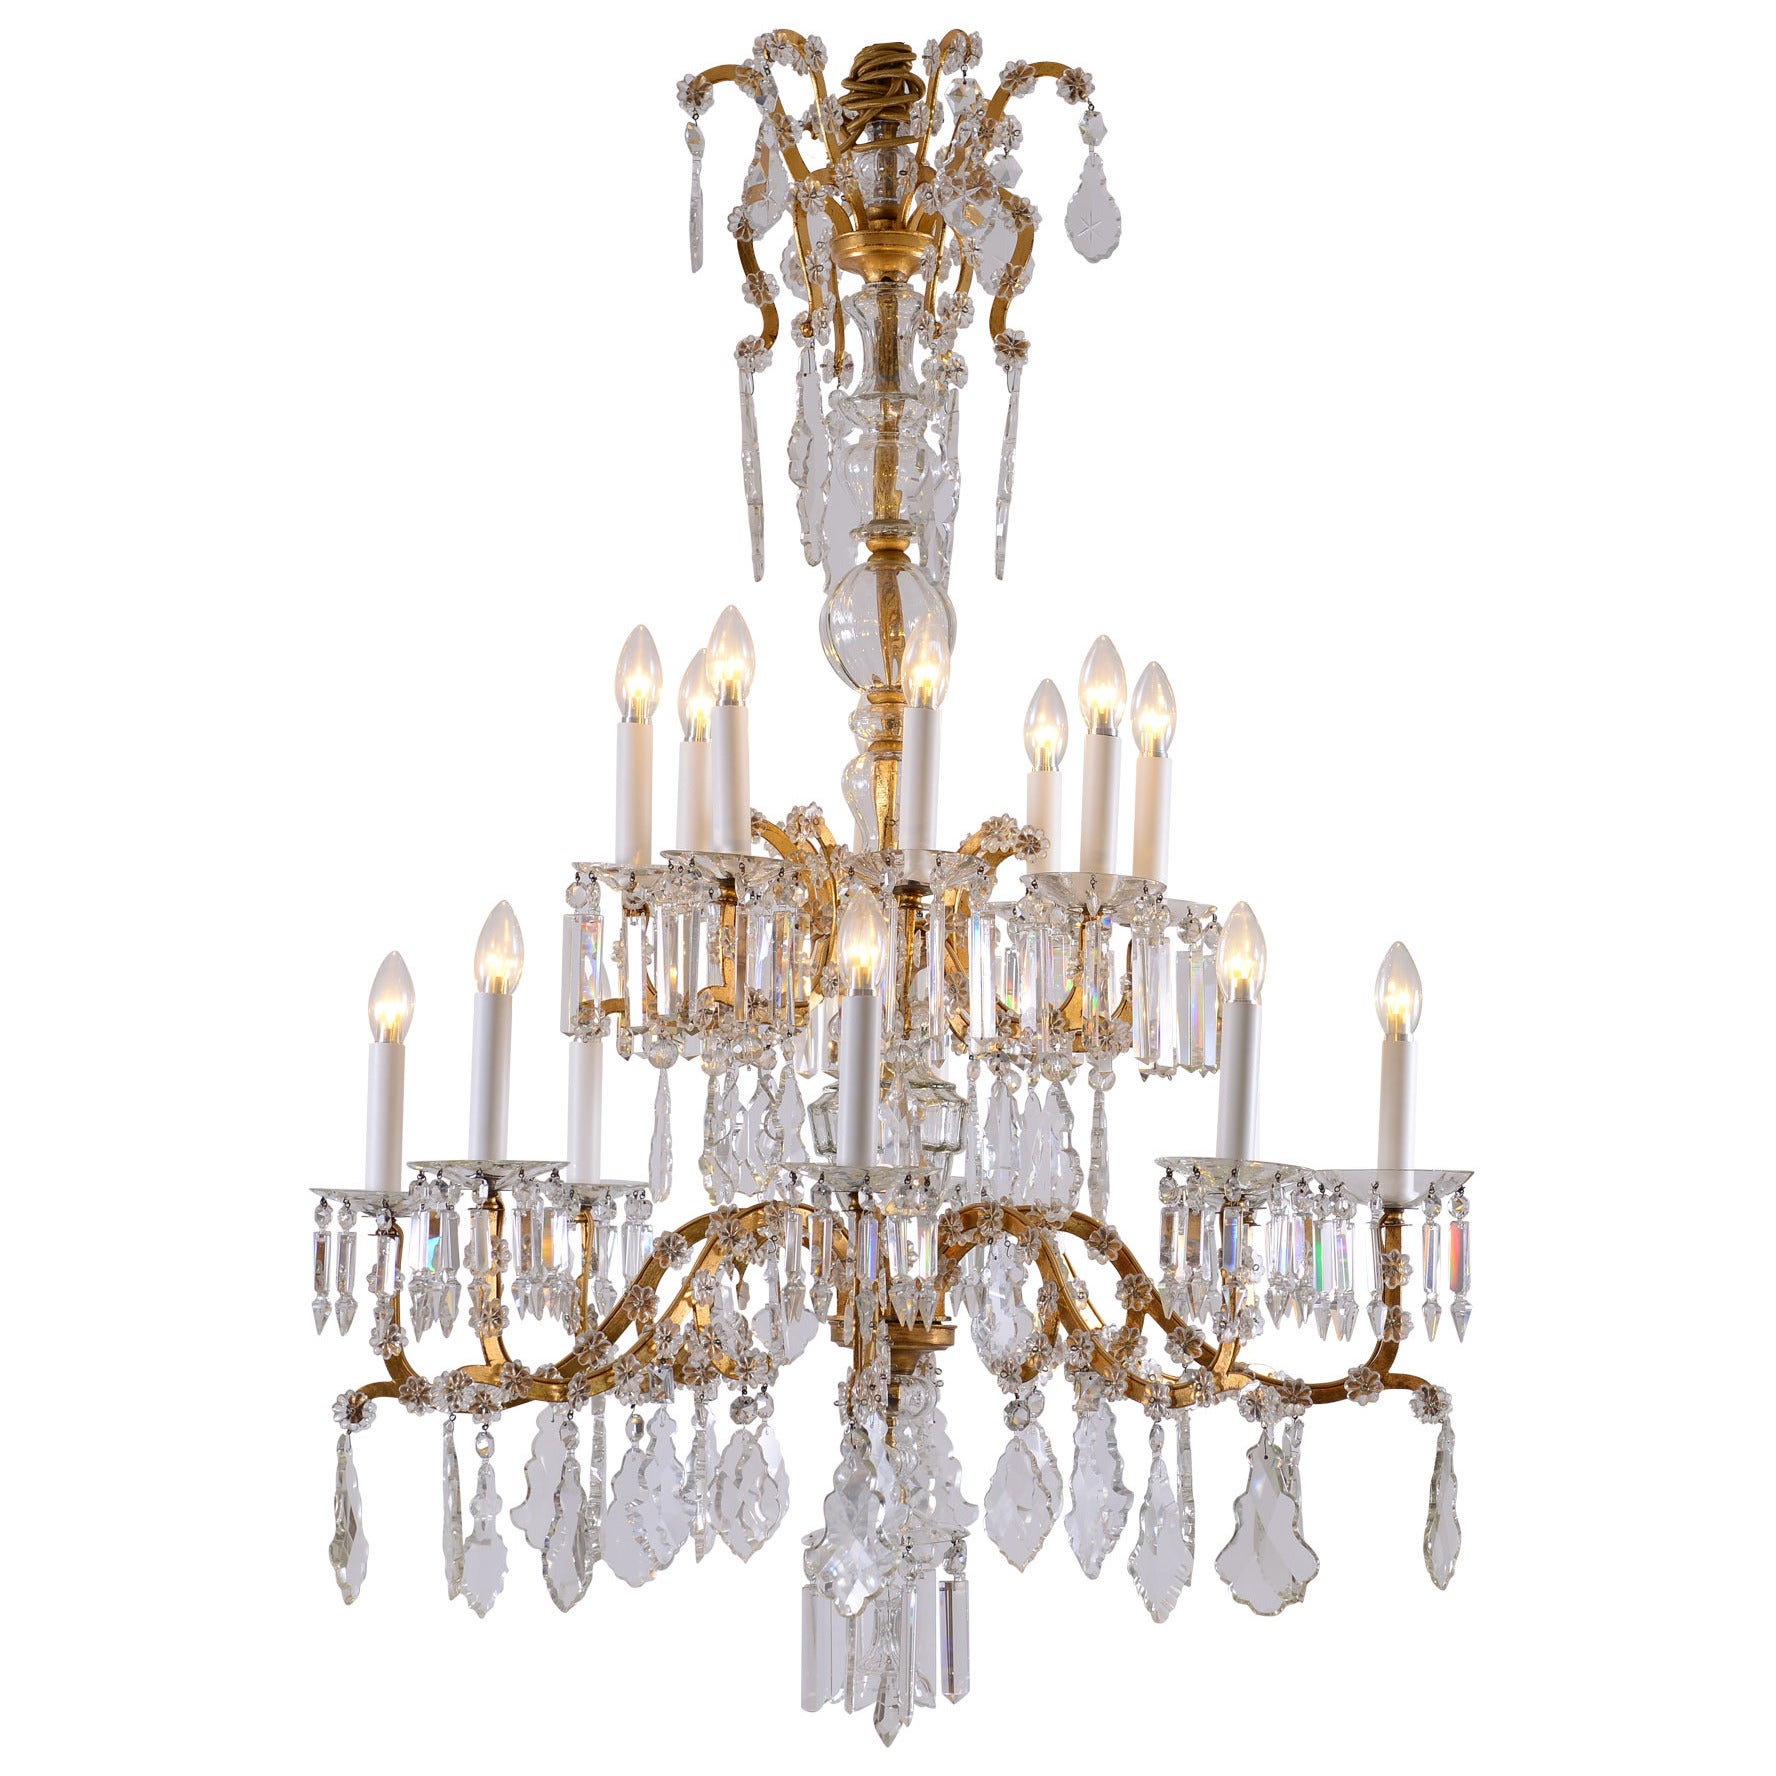 Wonderful Lobmeyr Baroque Style Chandelier from the 1920s